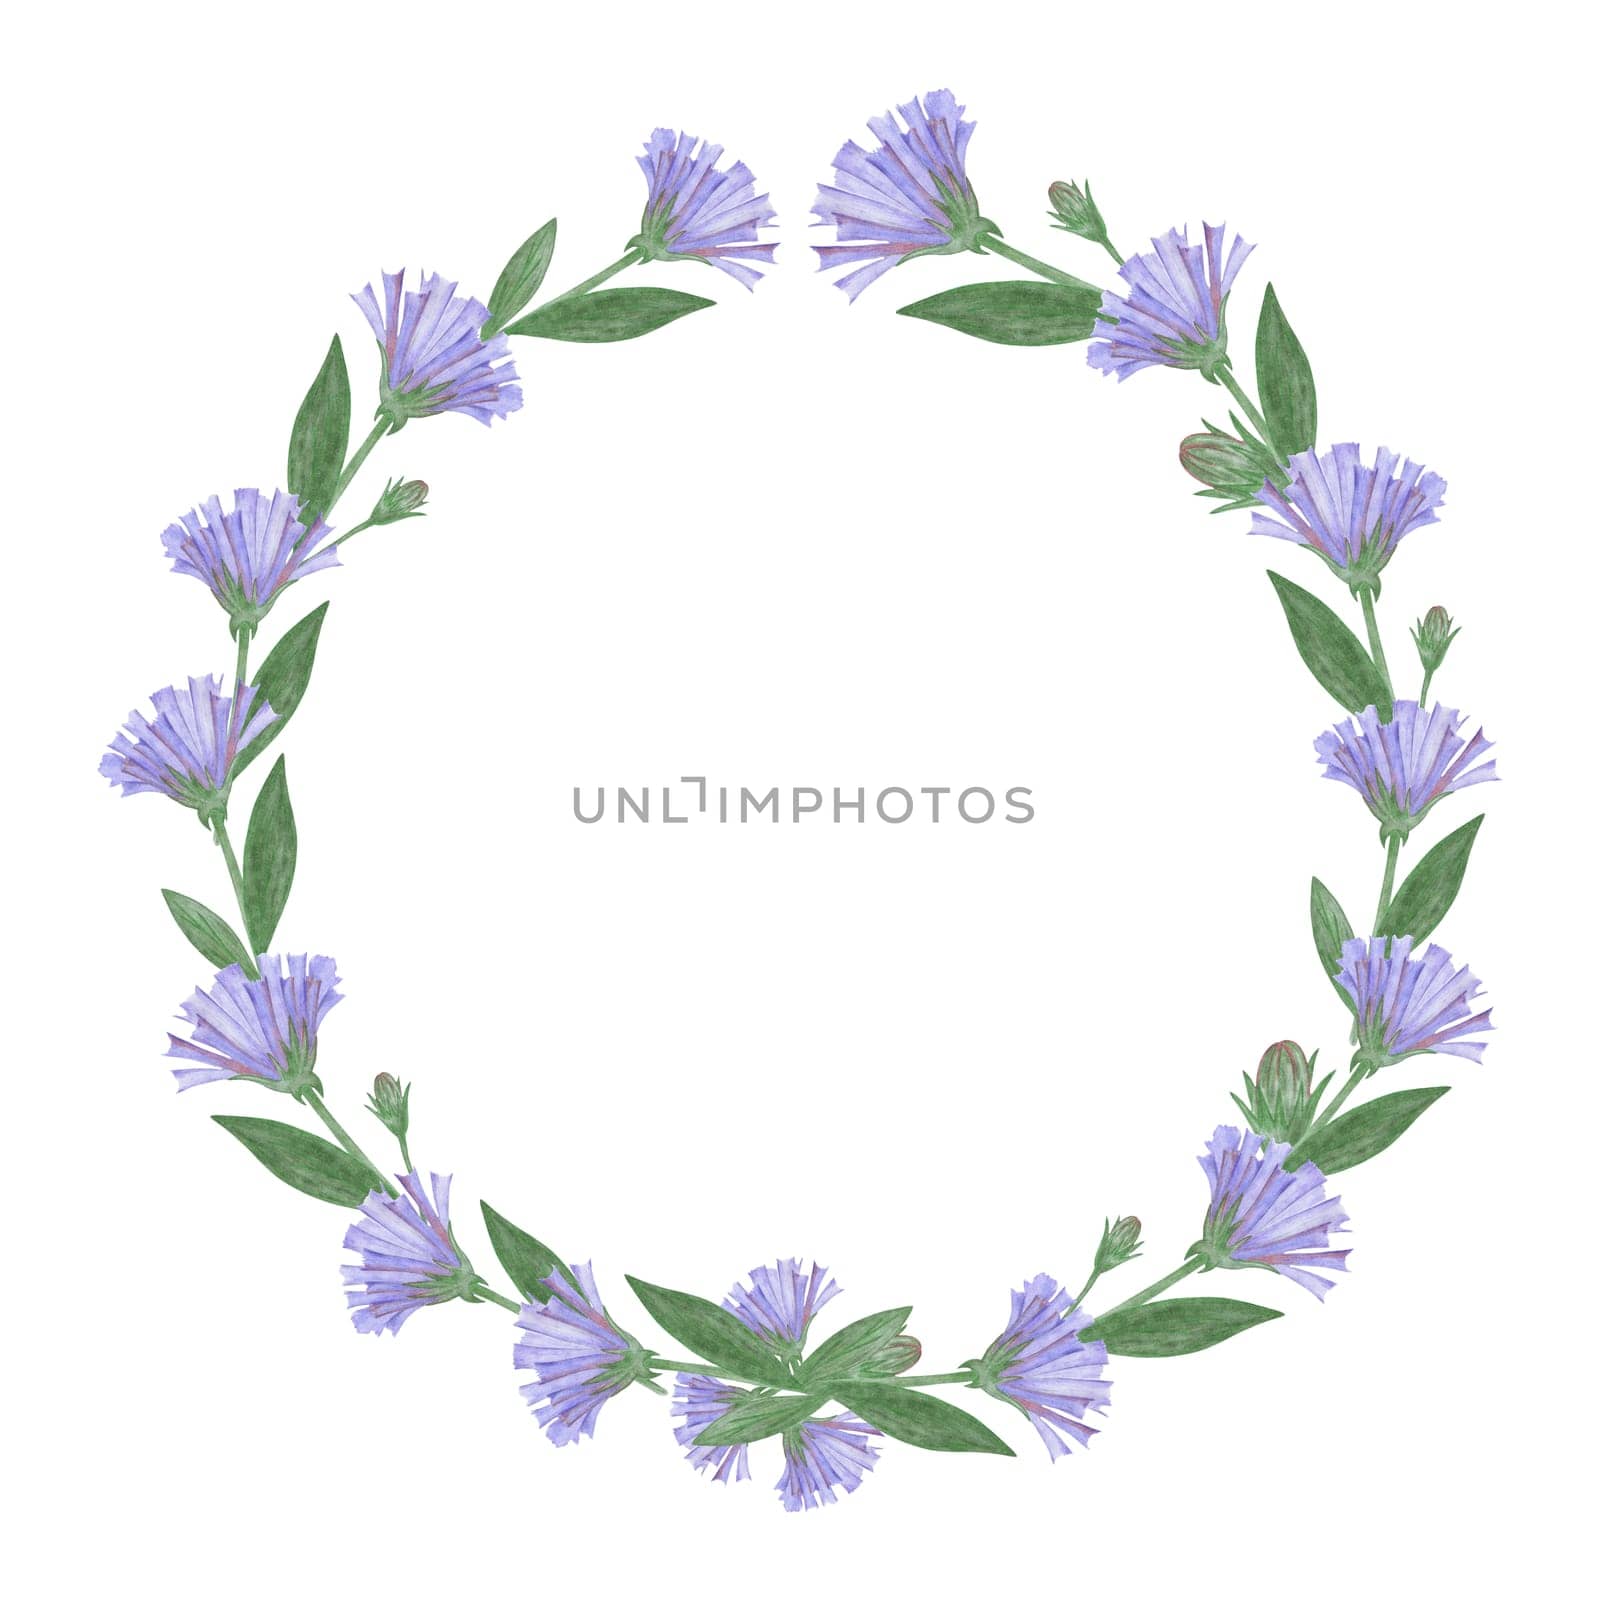 Cute Hand Drawn Flower Wreath with Blue Flowers. Elegant Floral Circle Frame with Lavender Flowers and Green Leaves on White Background. Decorative Elements for Design.